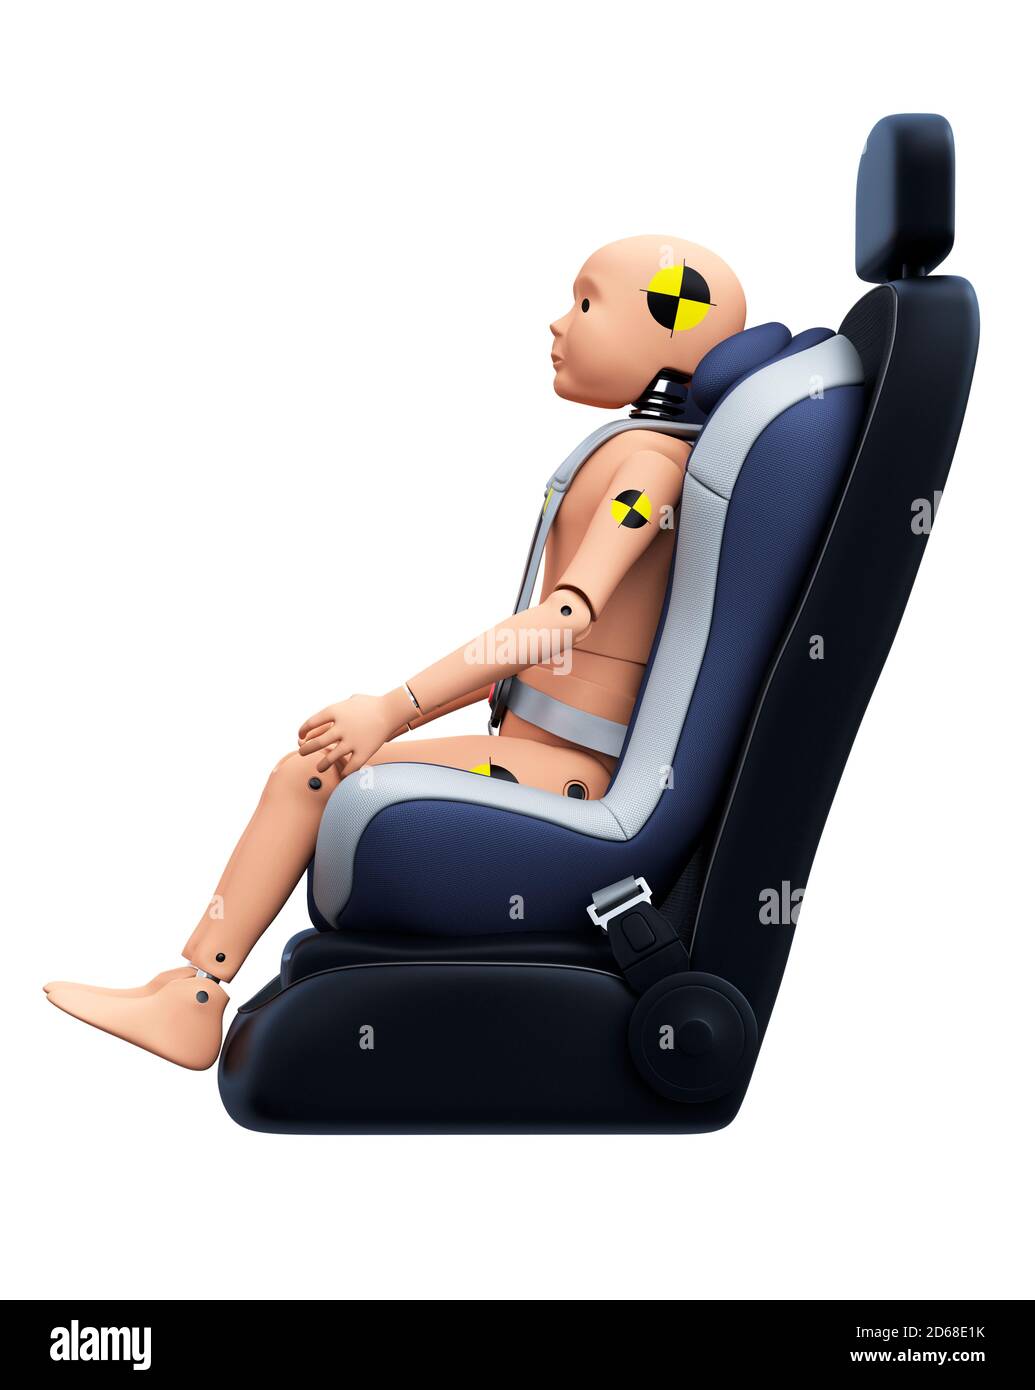 Child Crash Test Dummy in Car Seat. Side View. Safety Concept Stock Photo